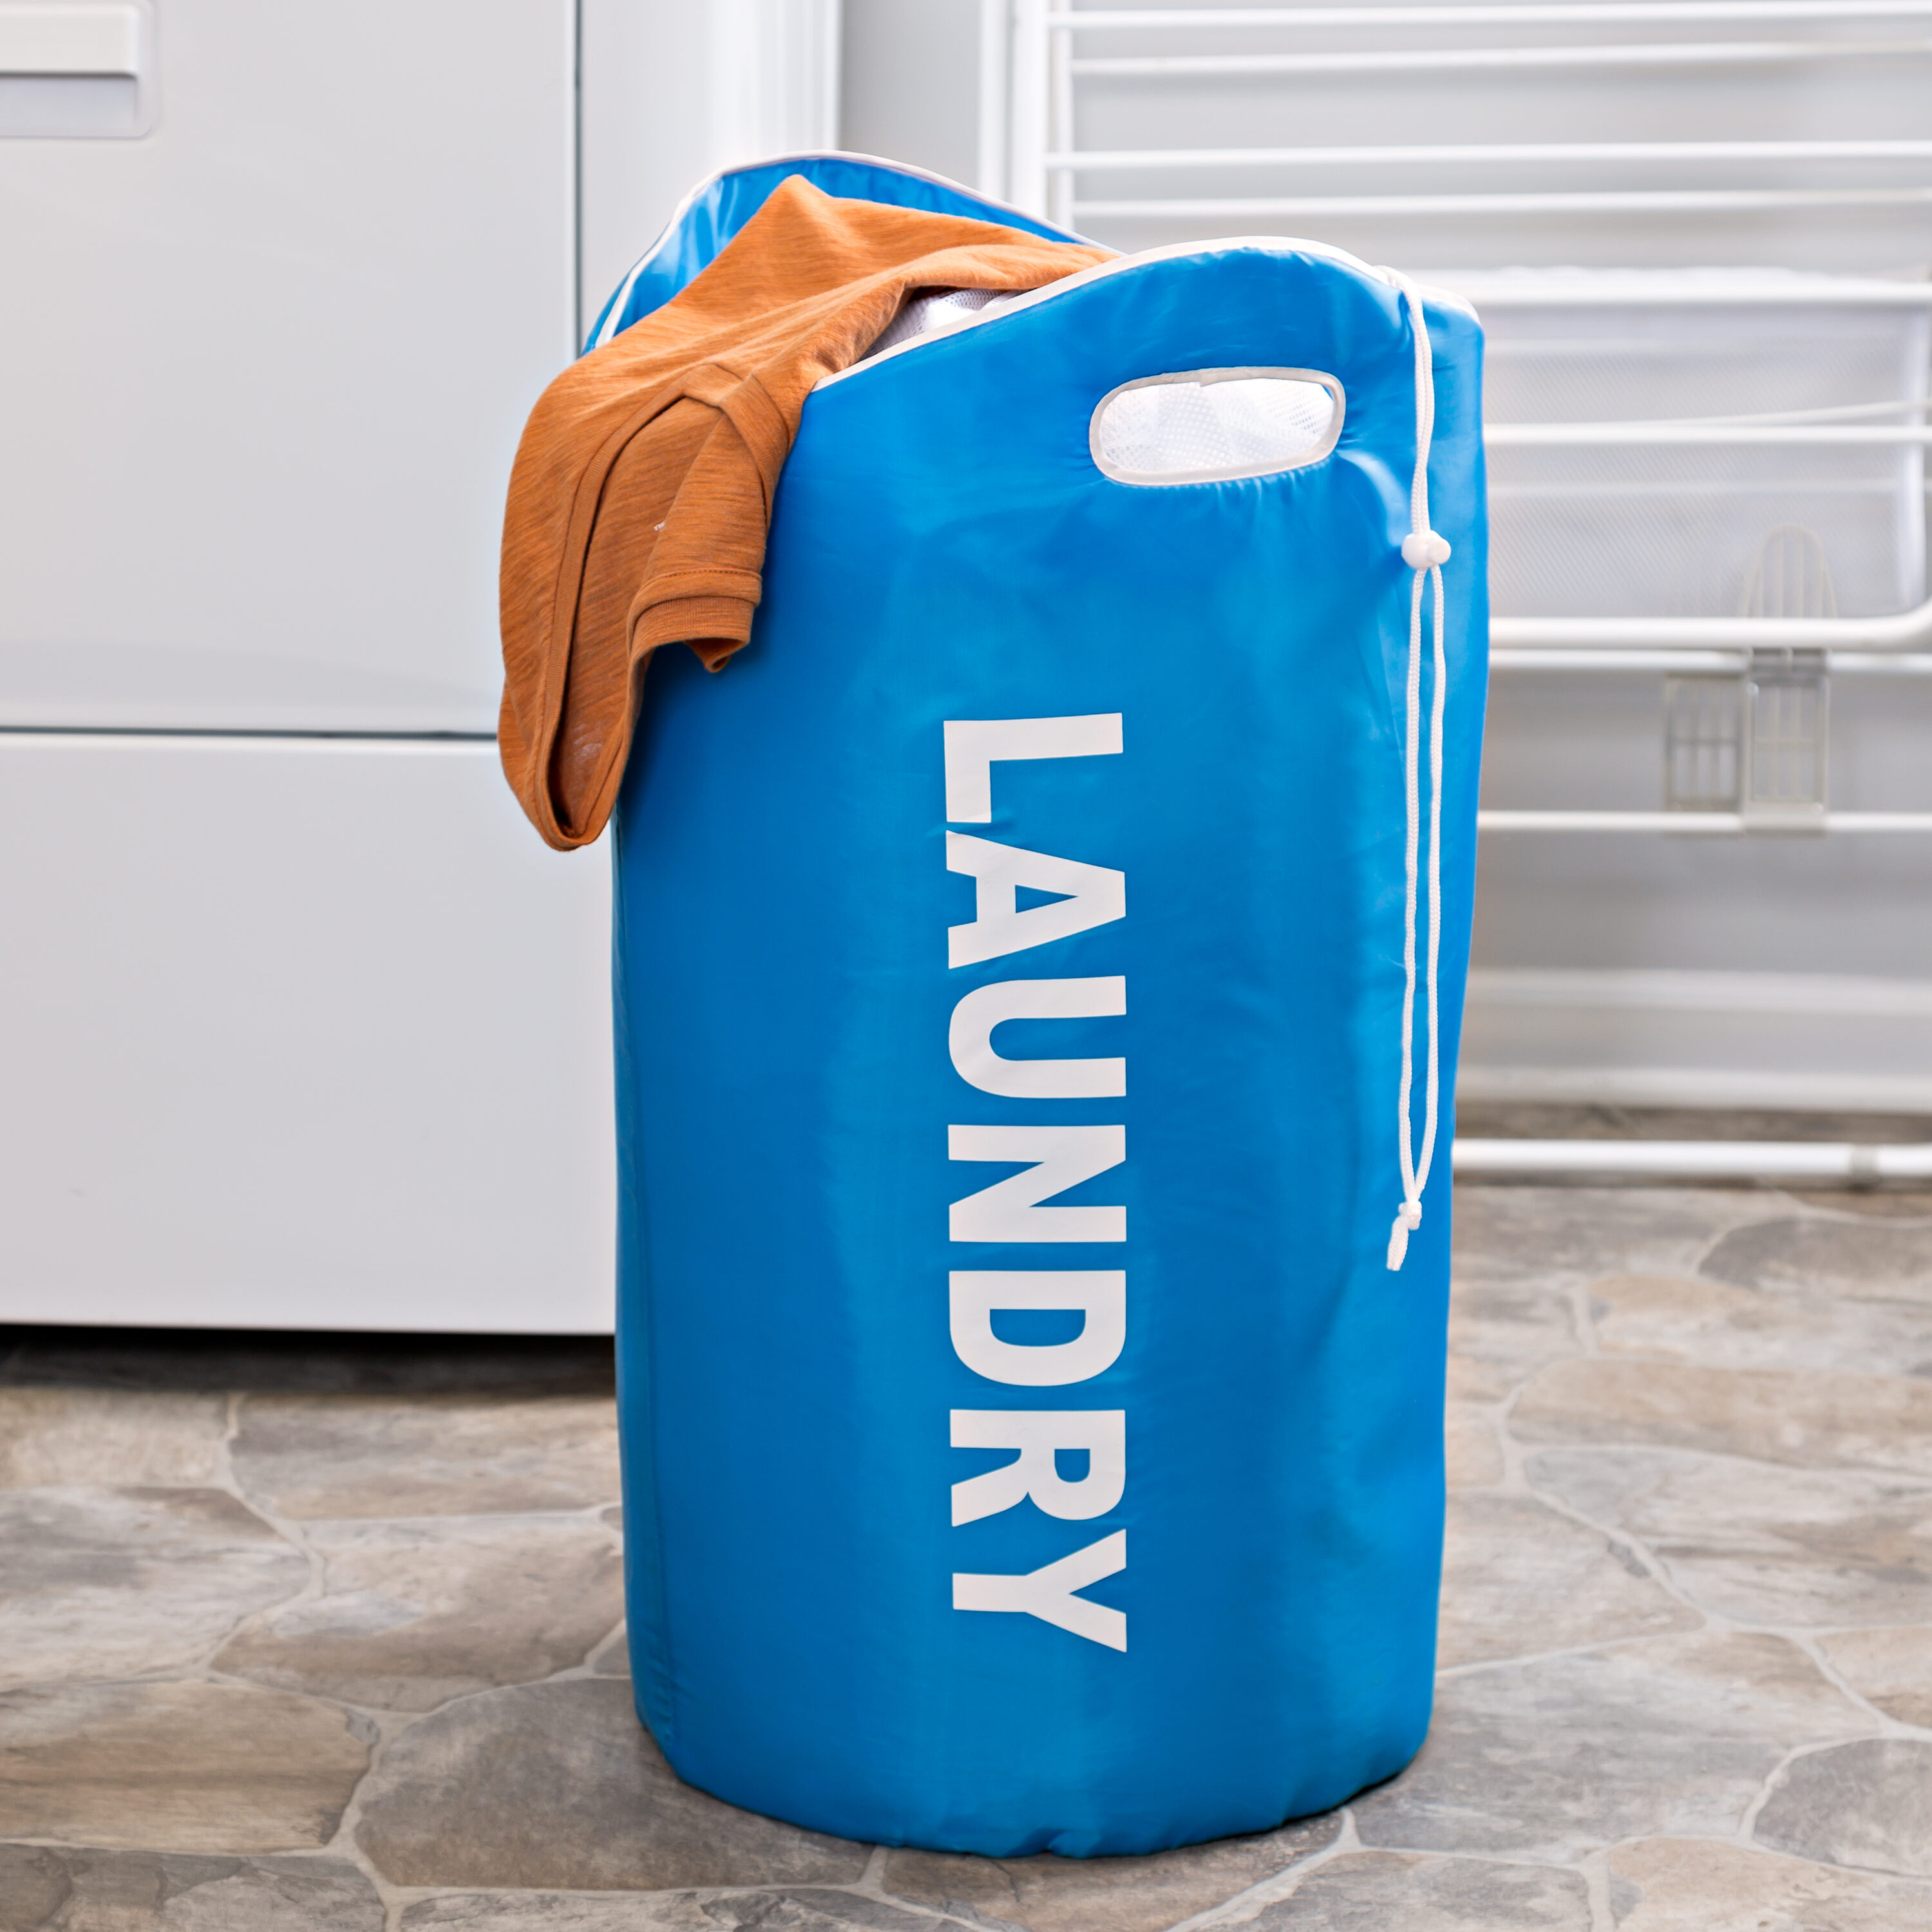 Laundry Hampers & Baskets at Lowes.com